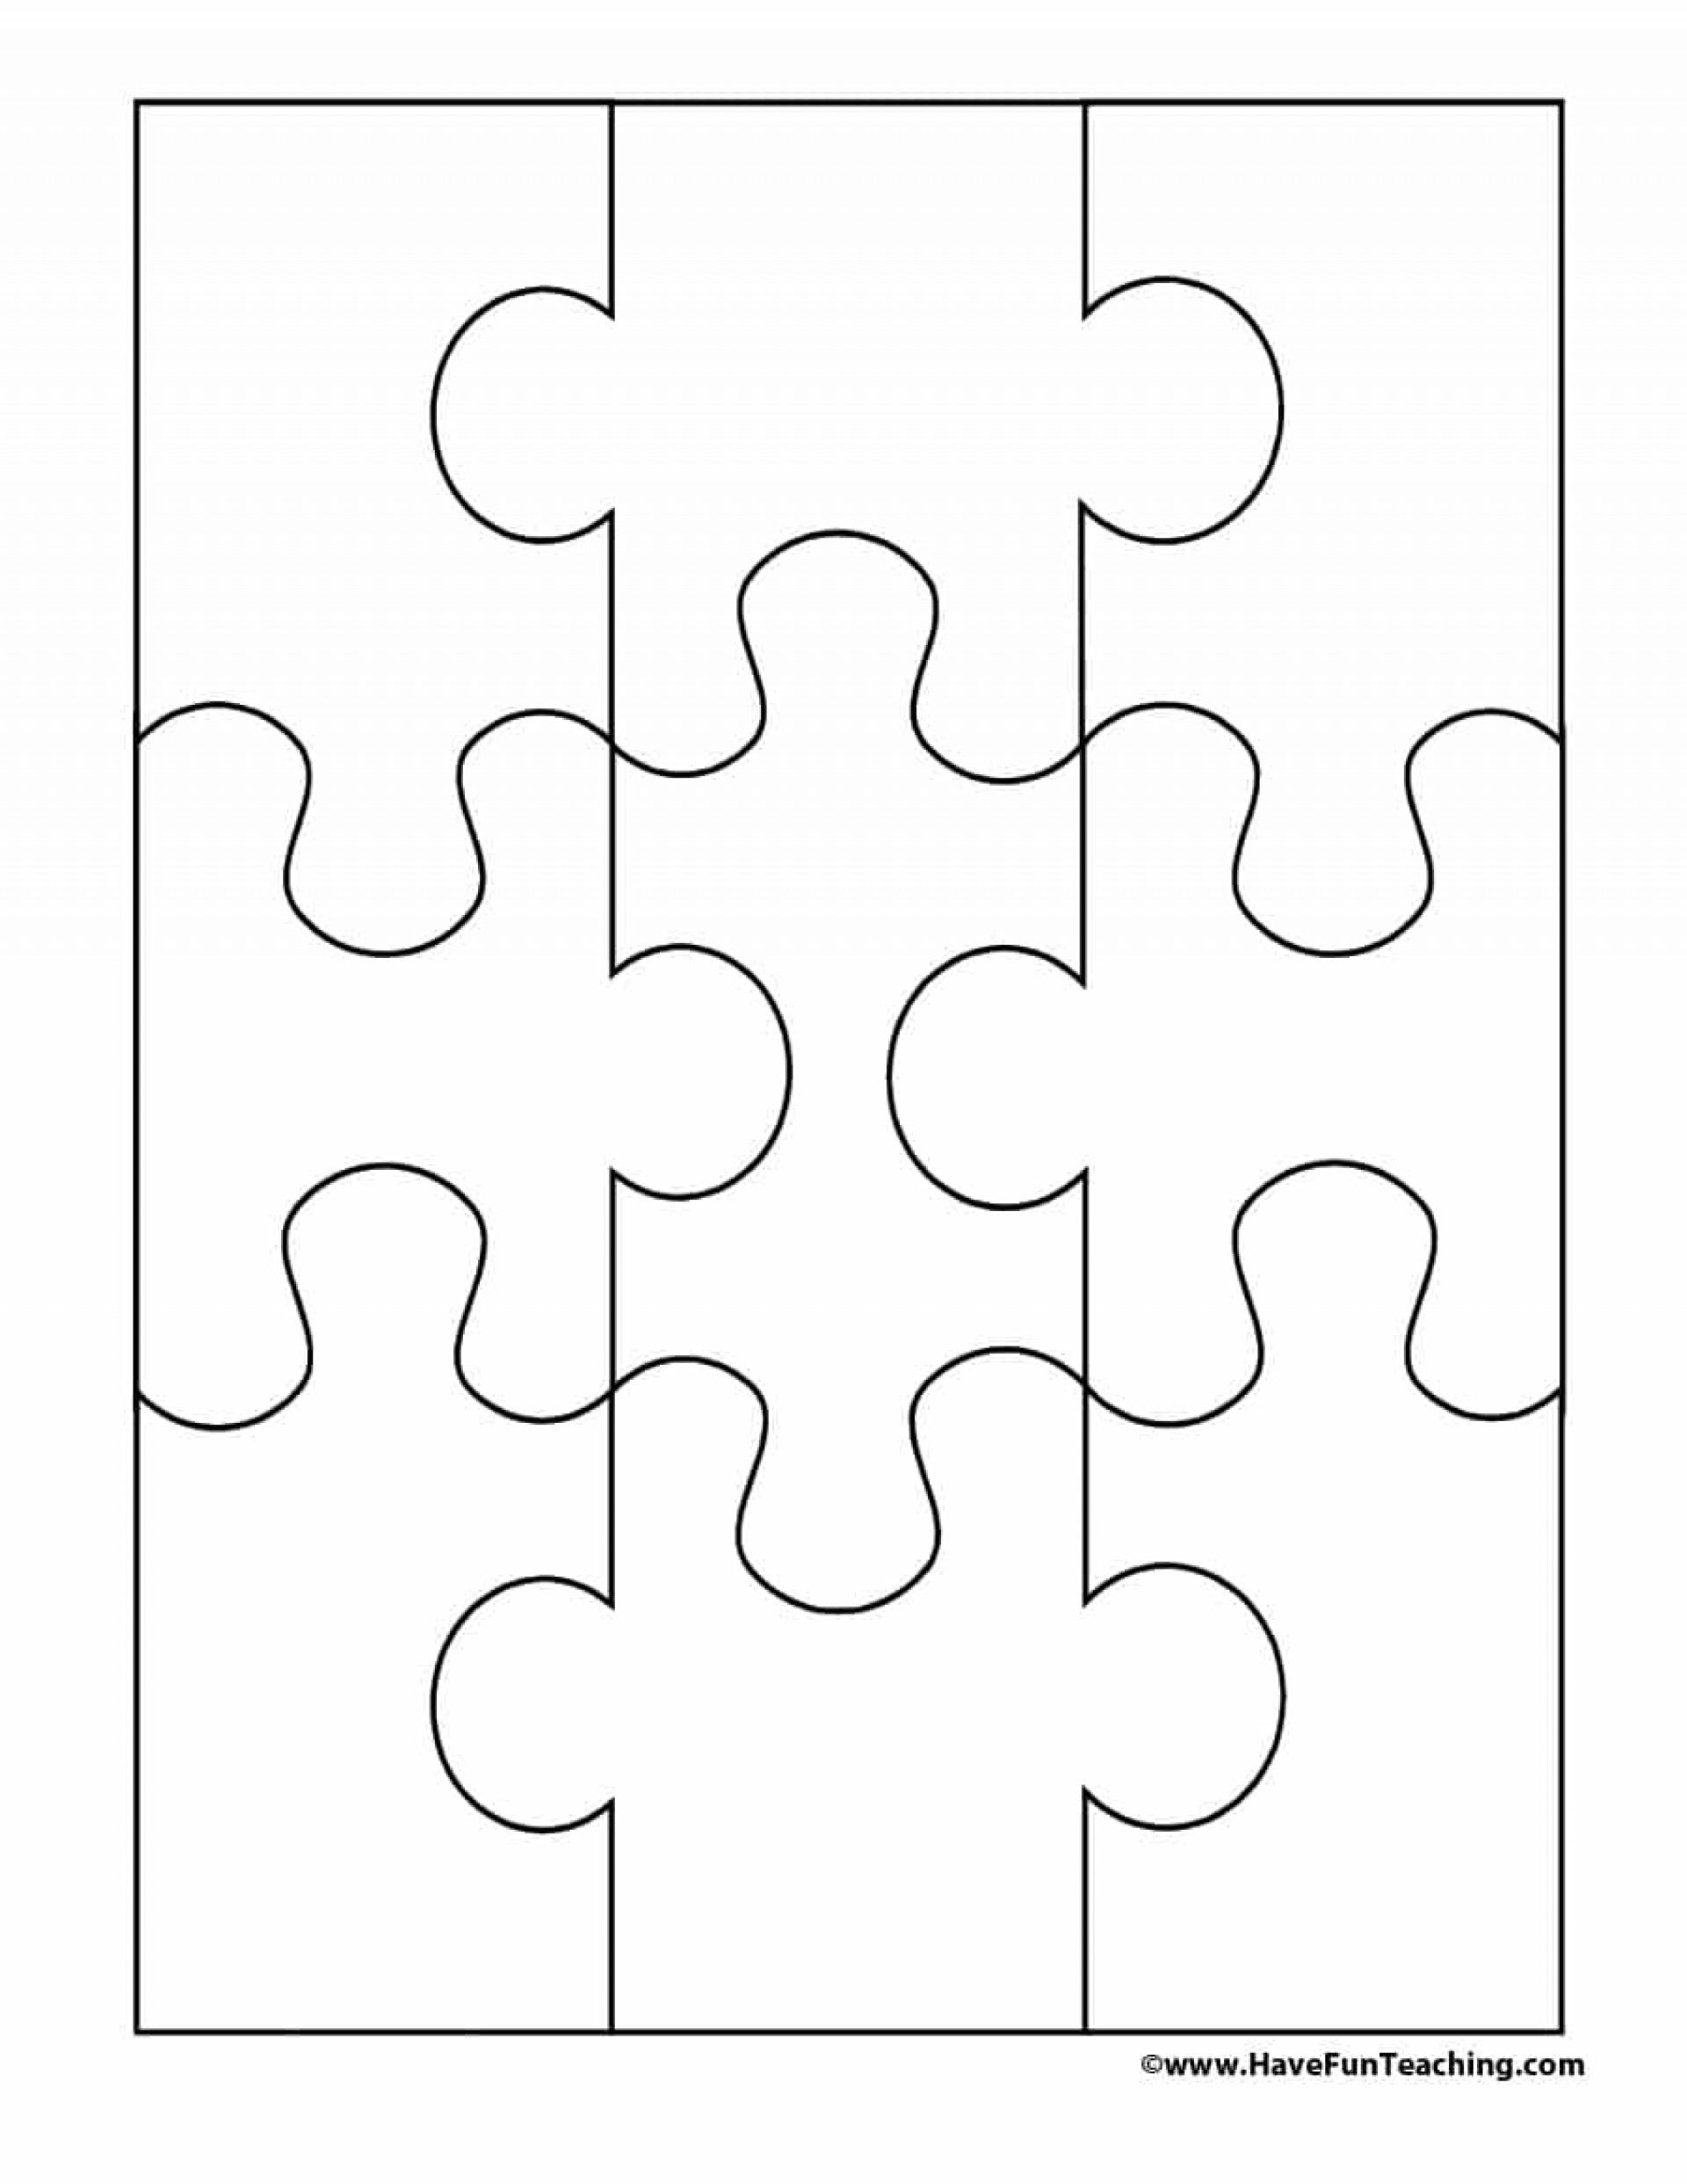 005 Puzzle Piece Template Ideas Jig Best Saw Free Blank Jigsaw - Printable Jigsaw Puzzle Pieces